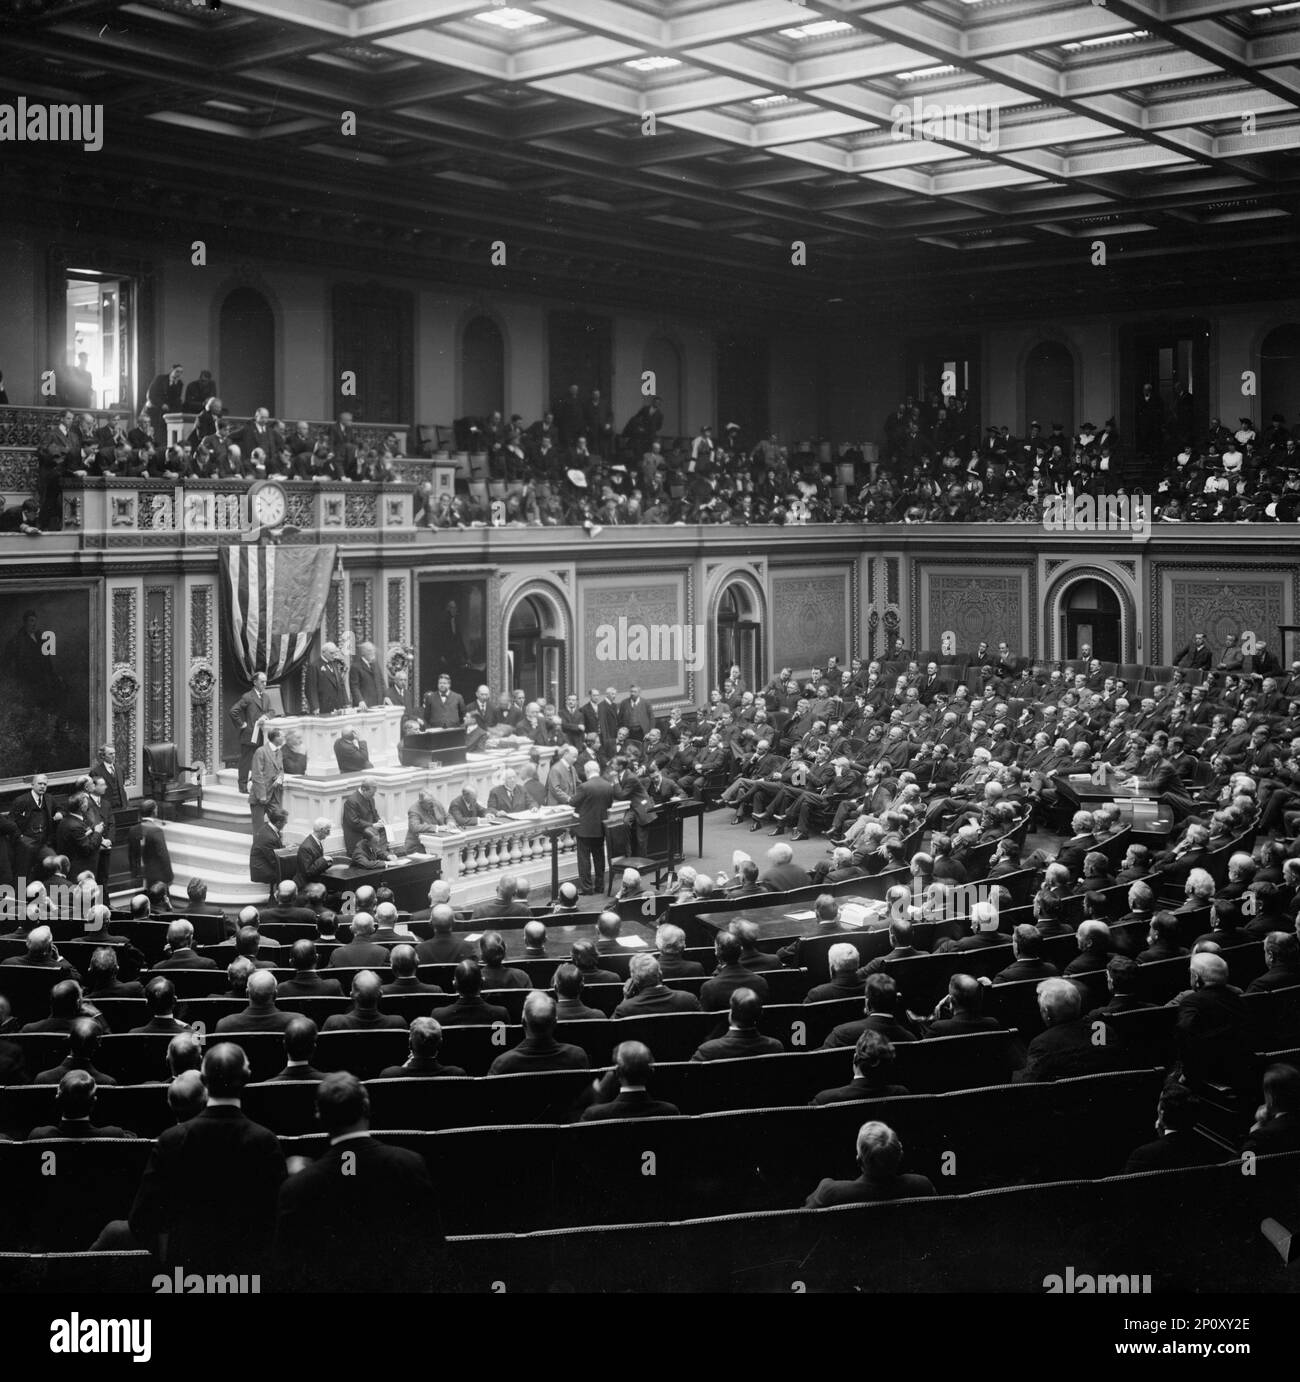 Opening of The 64th Congress 1915, Congressman Mann Introducing Speaker Clark, 1915. James Robert Mann (standing in front of flag, to the right) introduces Speaker of the House James Beauchamp Clark. Stock Photo